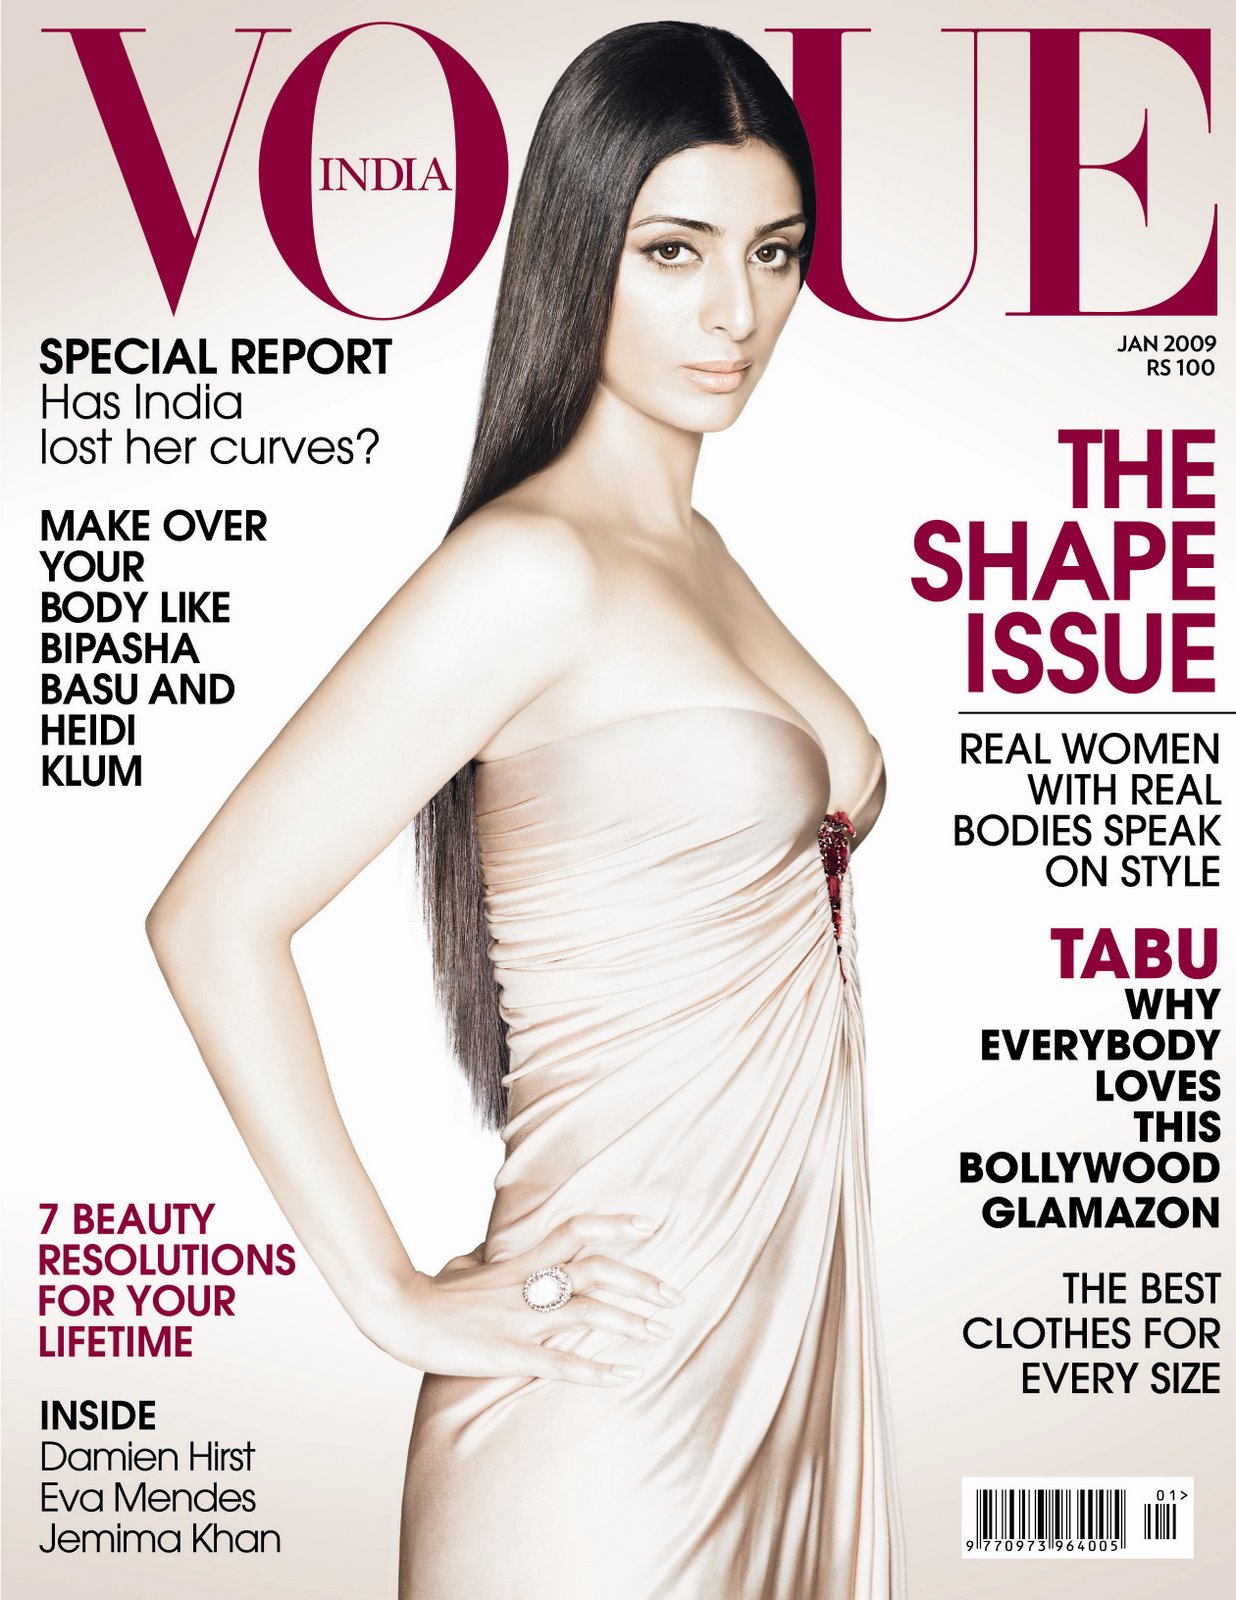 http://www.fashionmodeldirectory.com/images/magazines/covers/455/vogue-india-2009-january-01.jpg